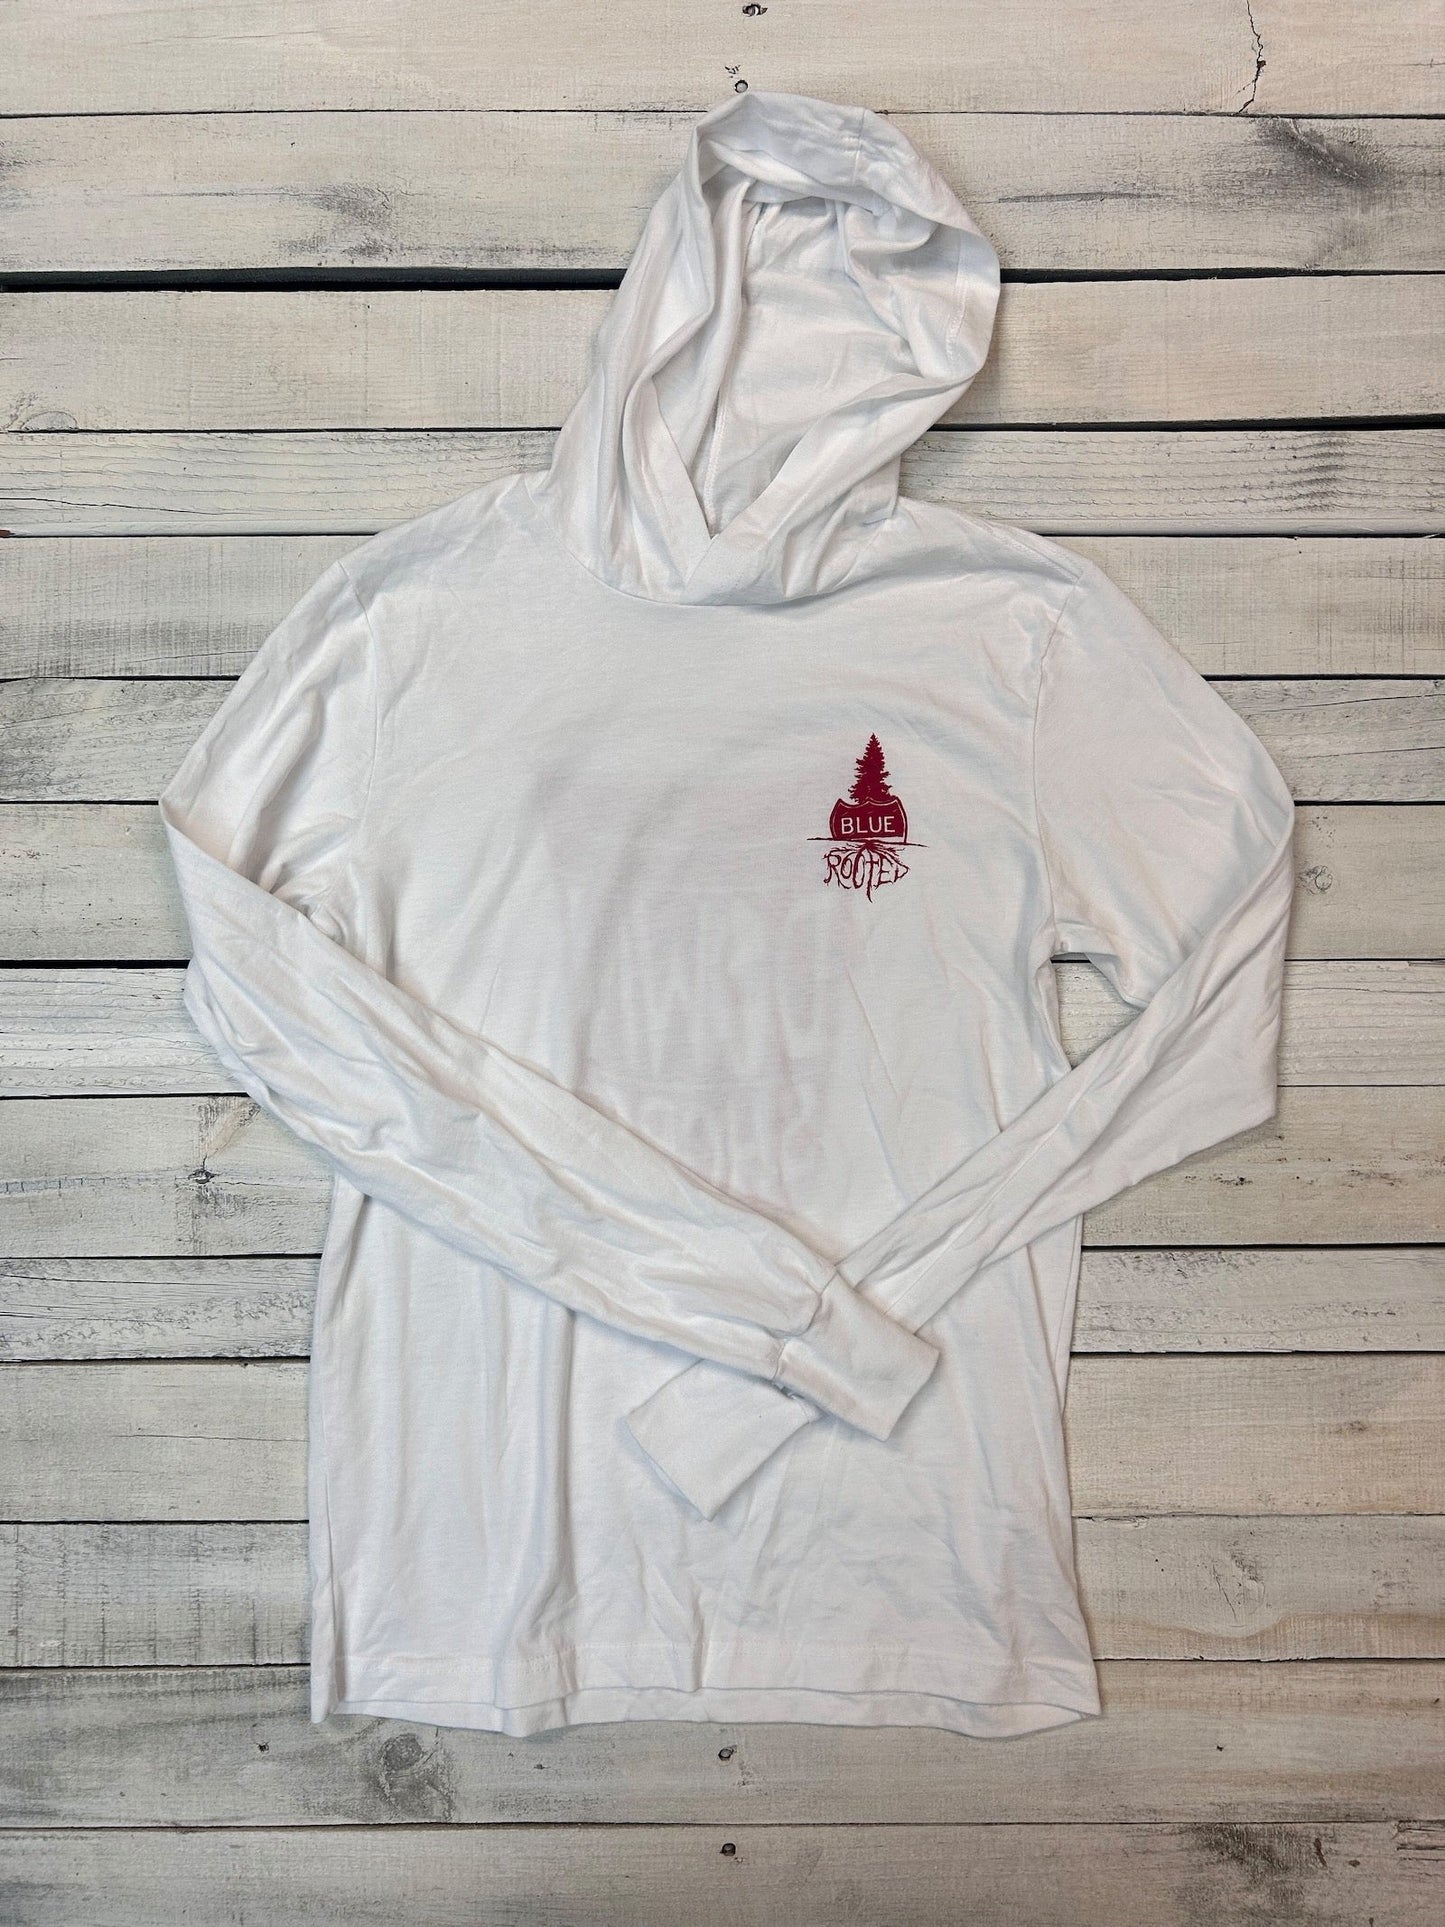 BlueRooted Down The Shore Solo Cup White Hooded Long Sleever